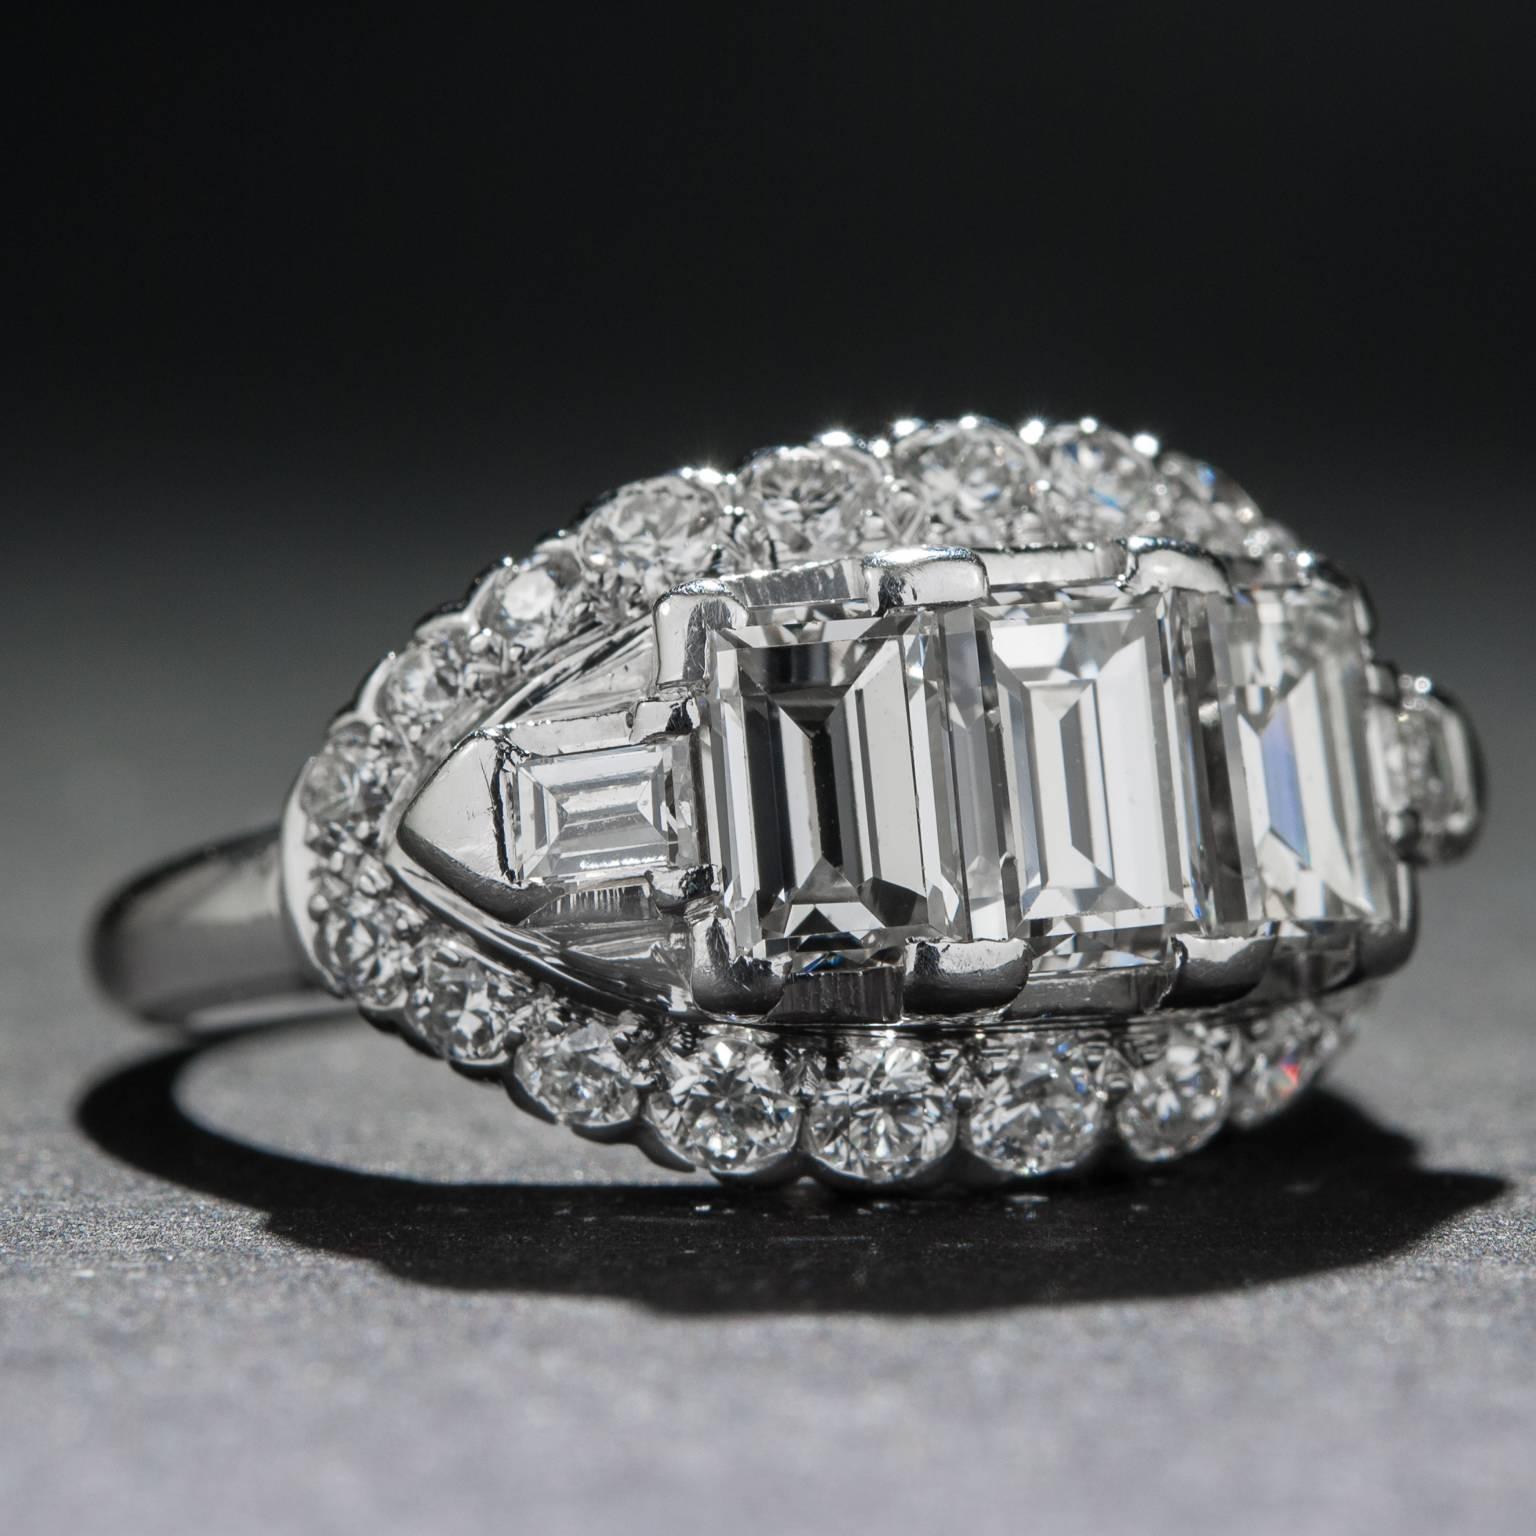 This stunning Art Deco ring features 3 gorgeous emerald cut diamonds for a total of 1.80 carats as well as an additional .70 carats of accent diamonds. This piece is crafted in platinum and it is currently size 7.25.